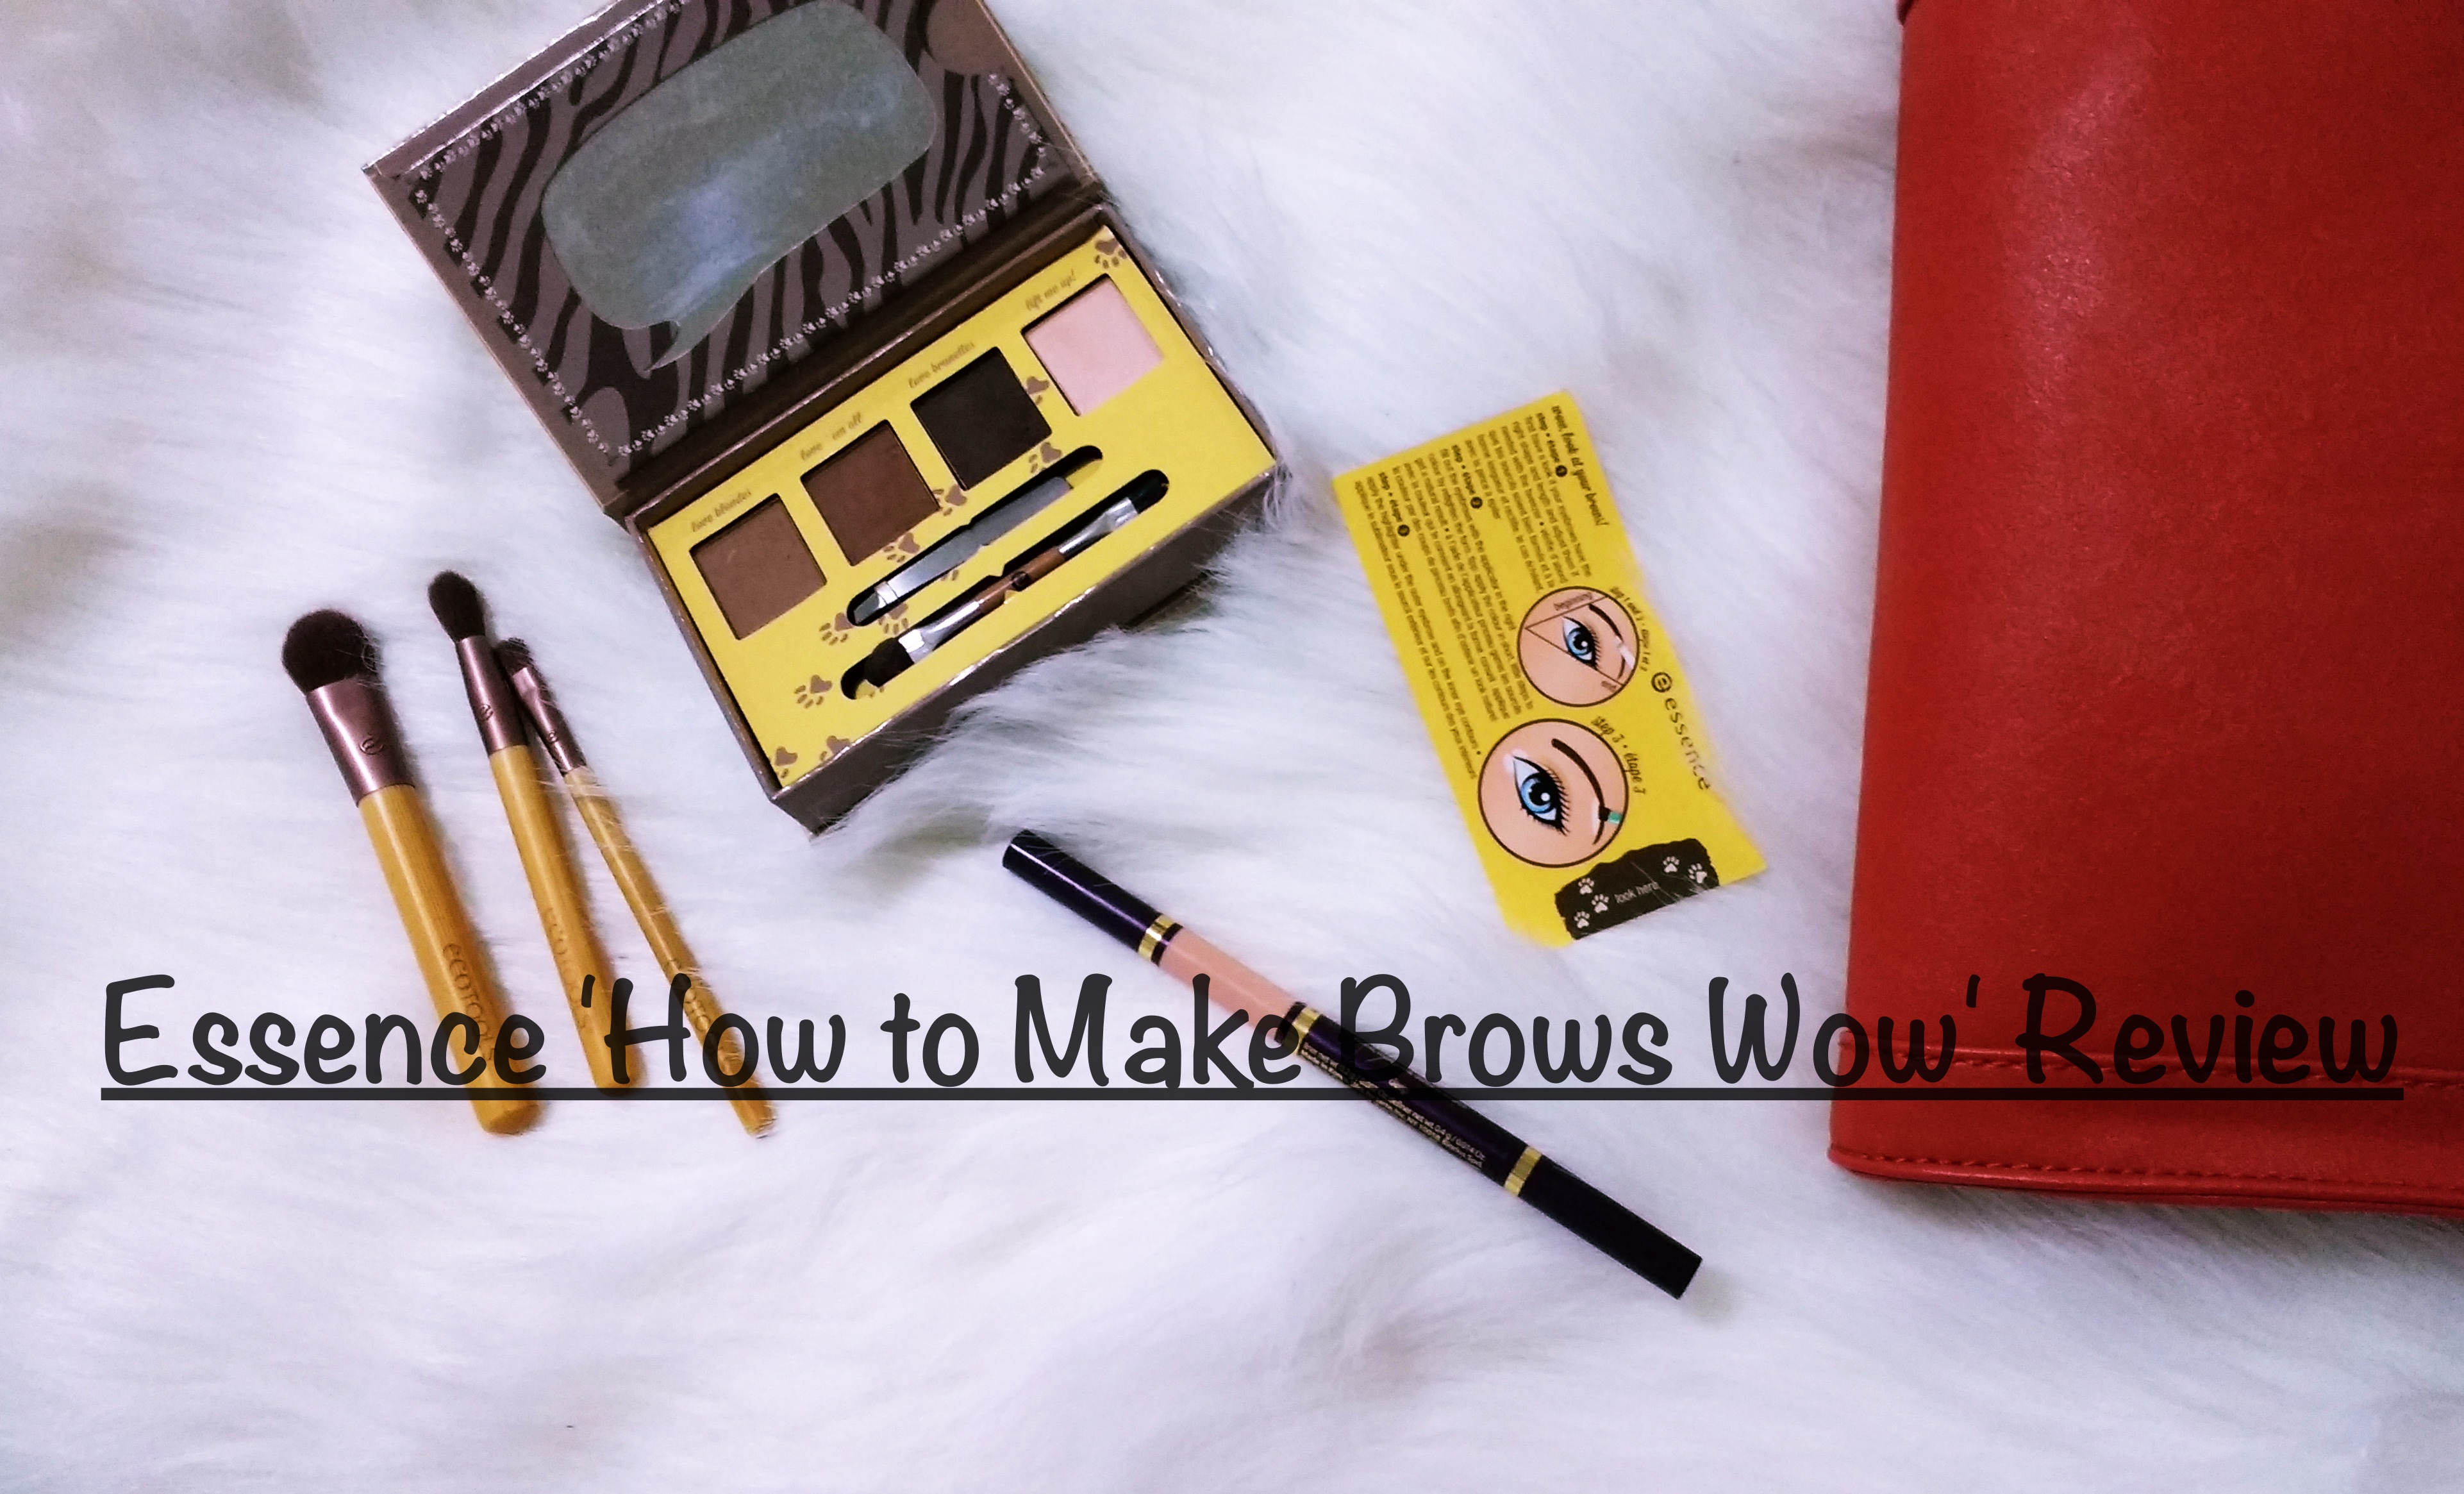 Essence How to make Brows wow – Review Yay or Nay?